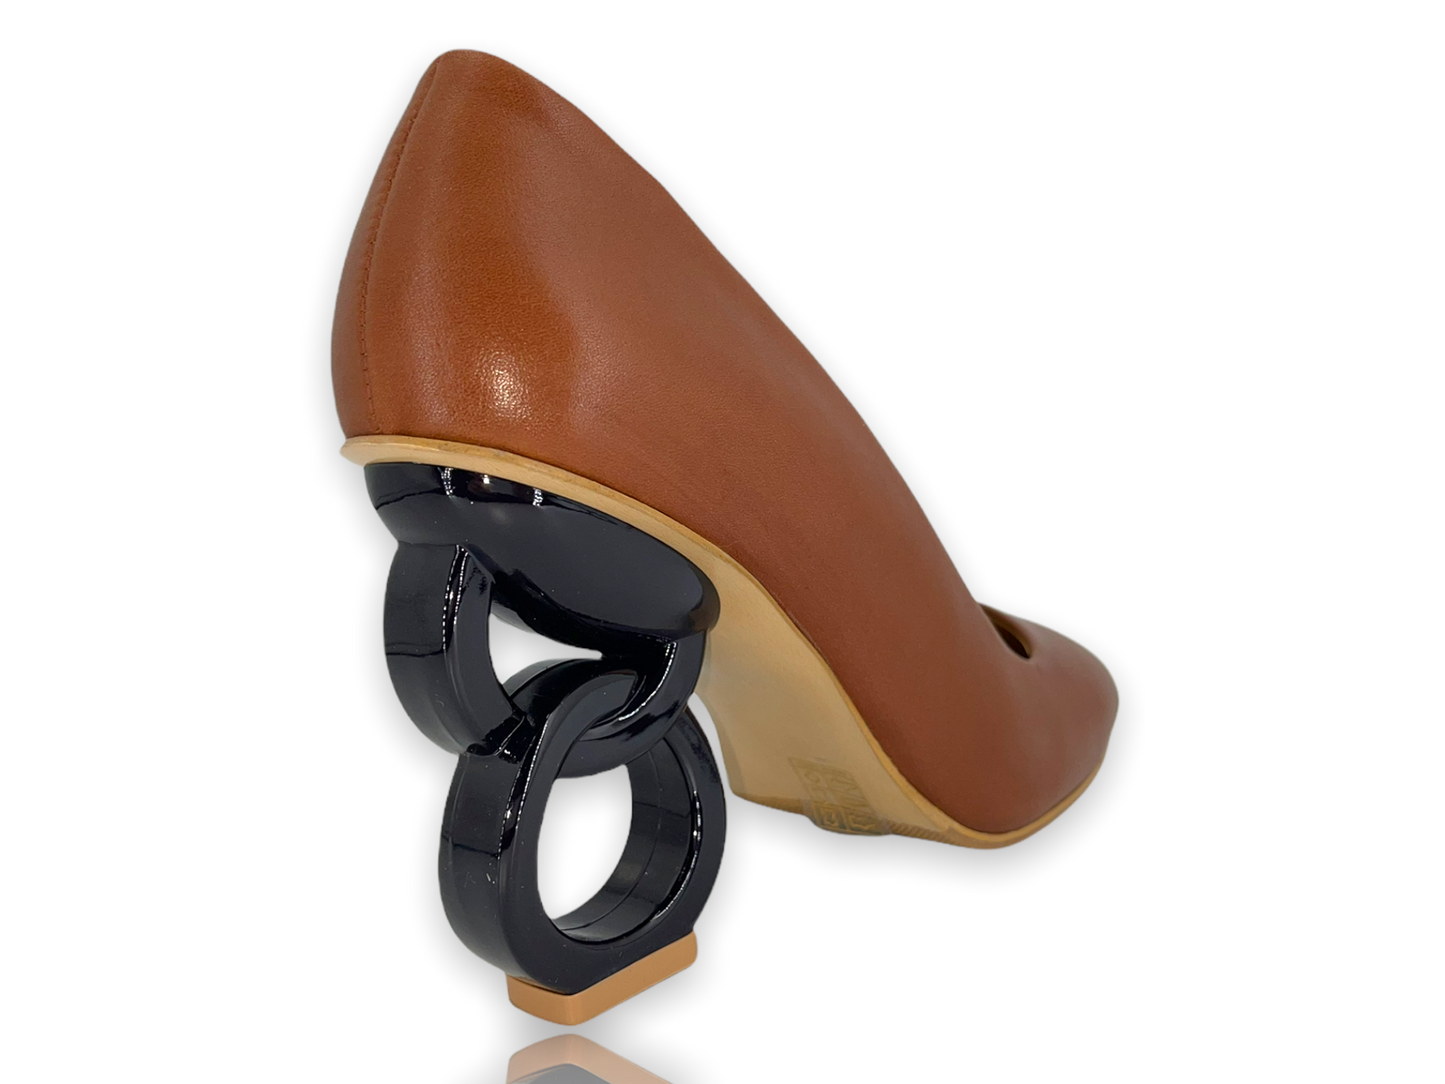 The Belem Brown Leather Pump Final Sale!